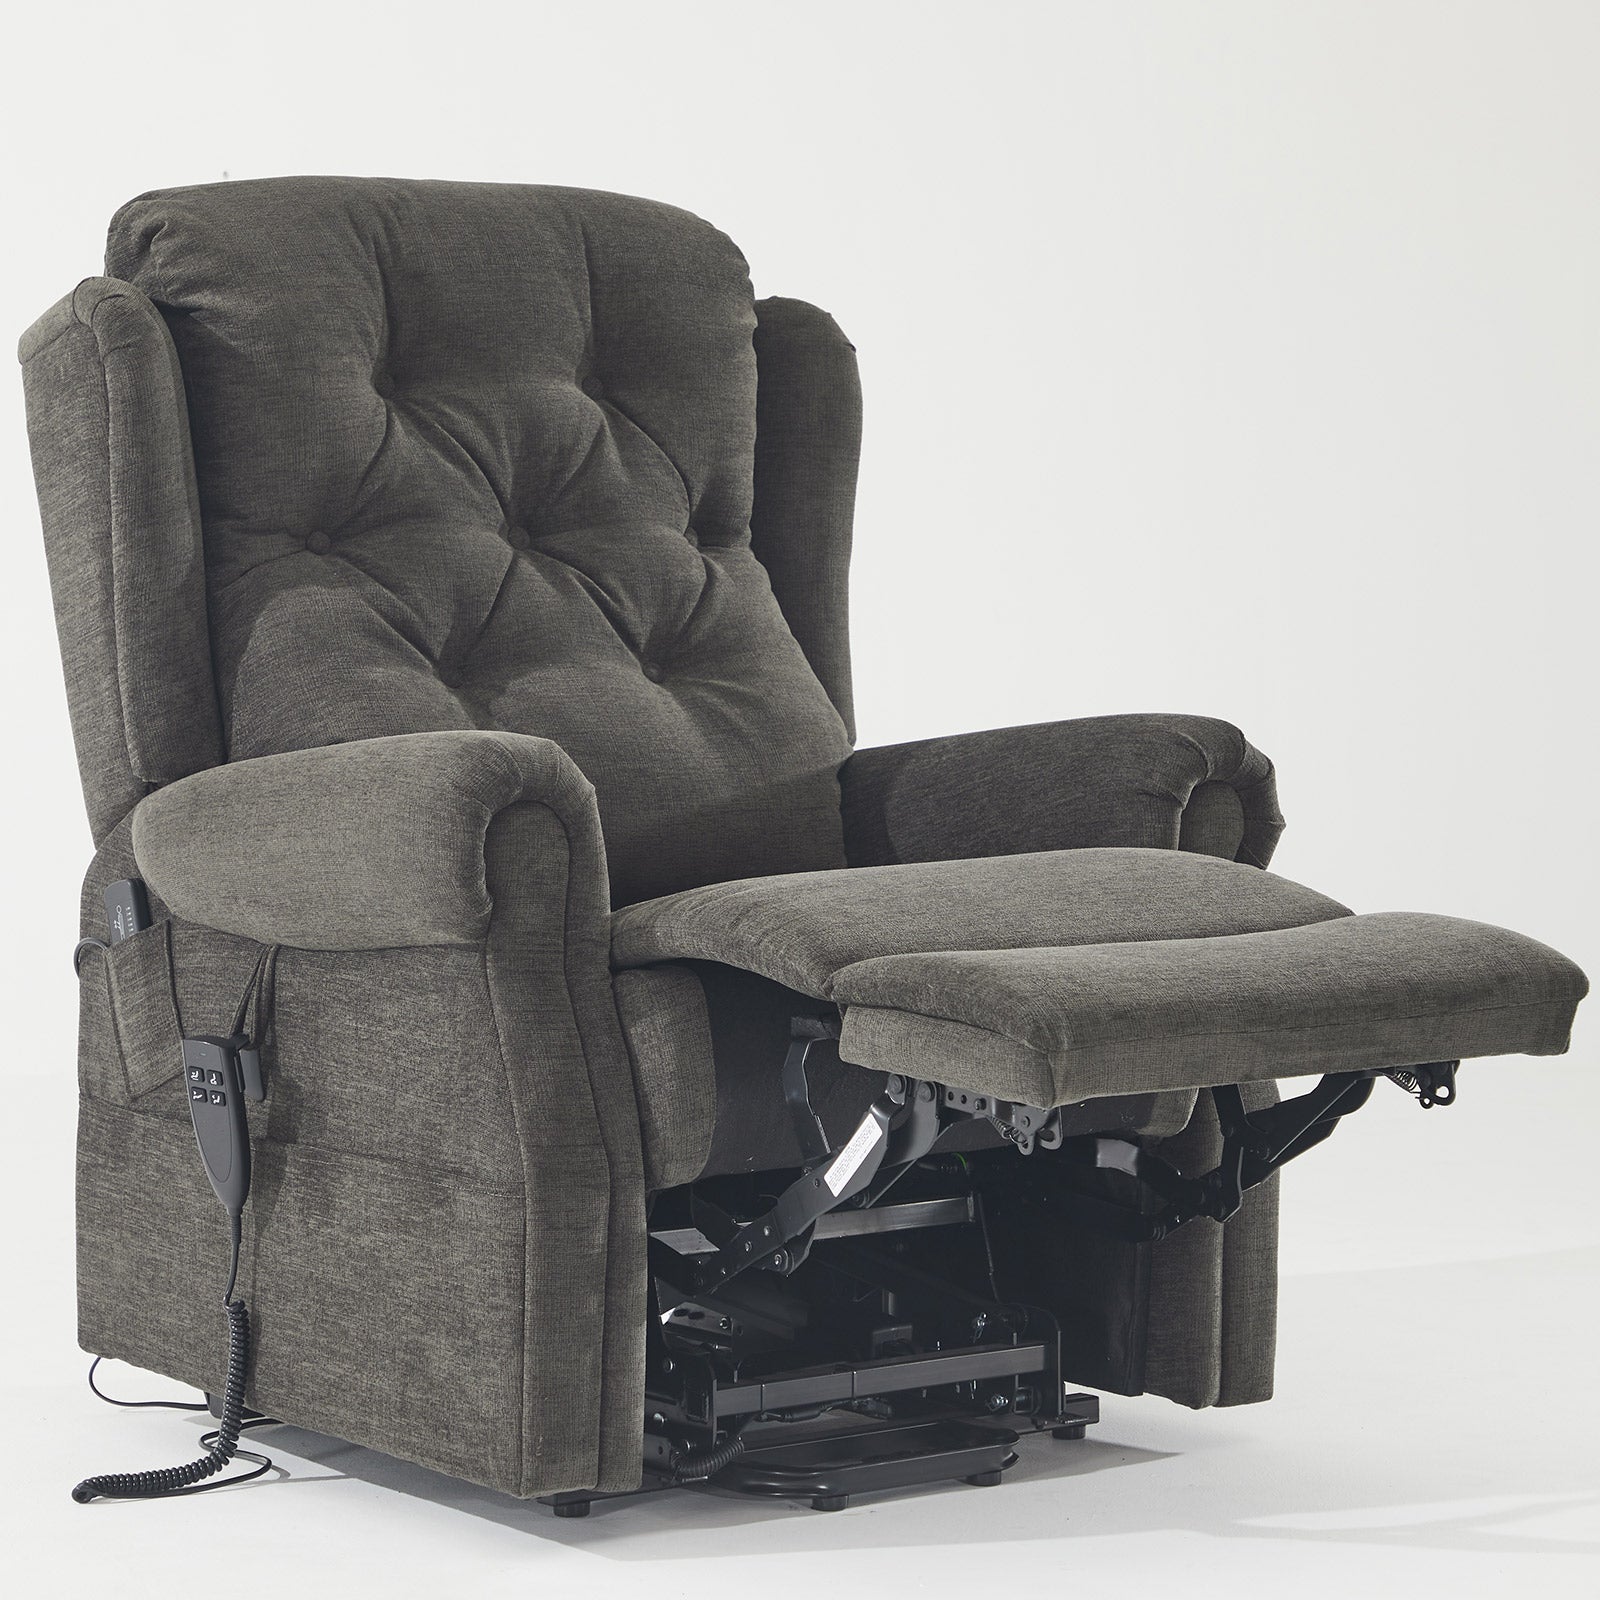  Dual Motor Power Lift Recliner With Full Lay Flat And Heat&Massage